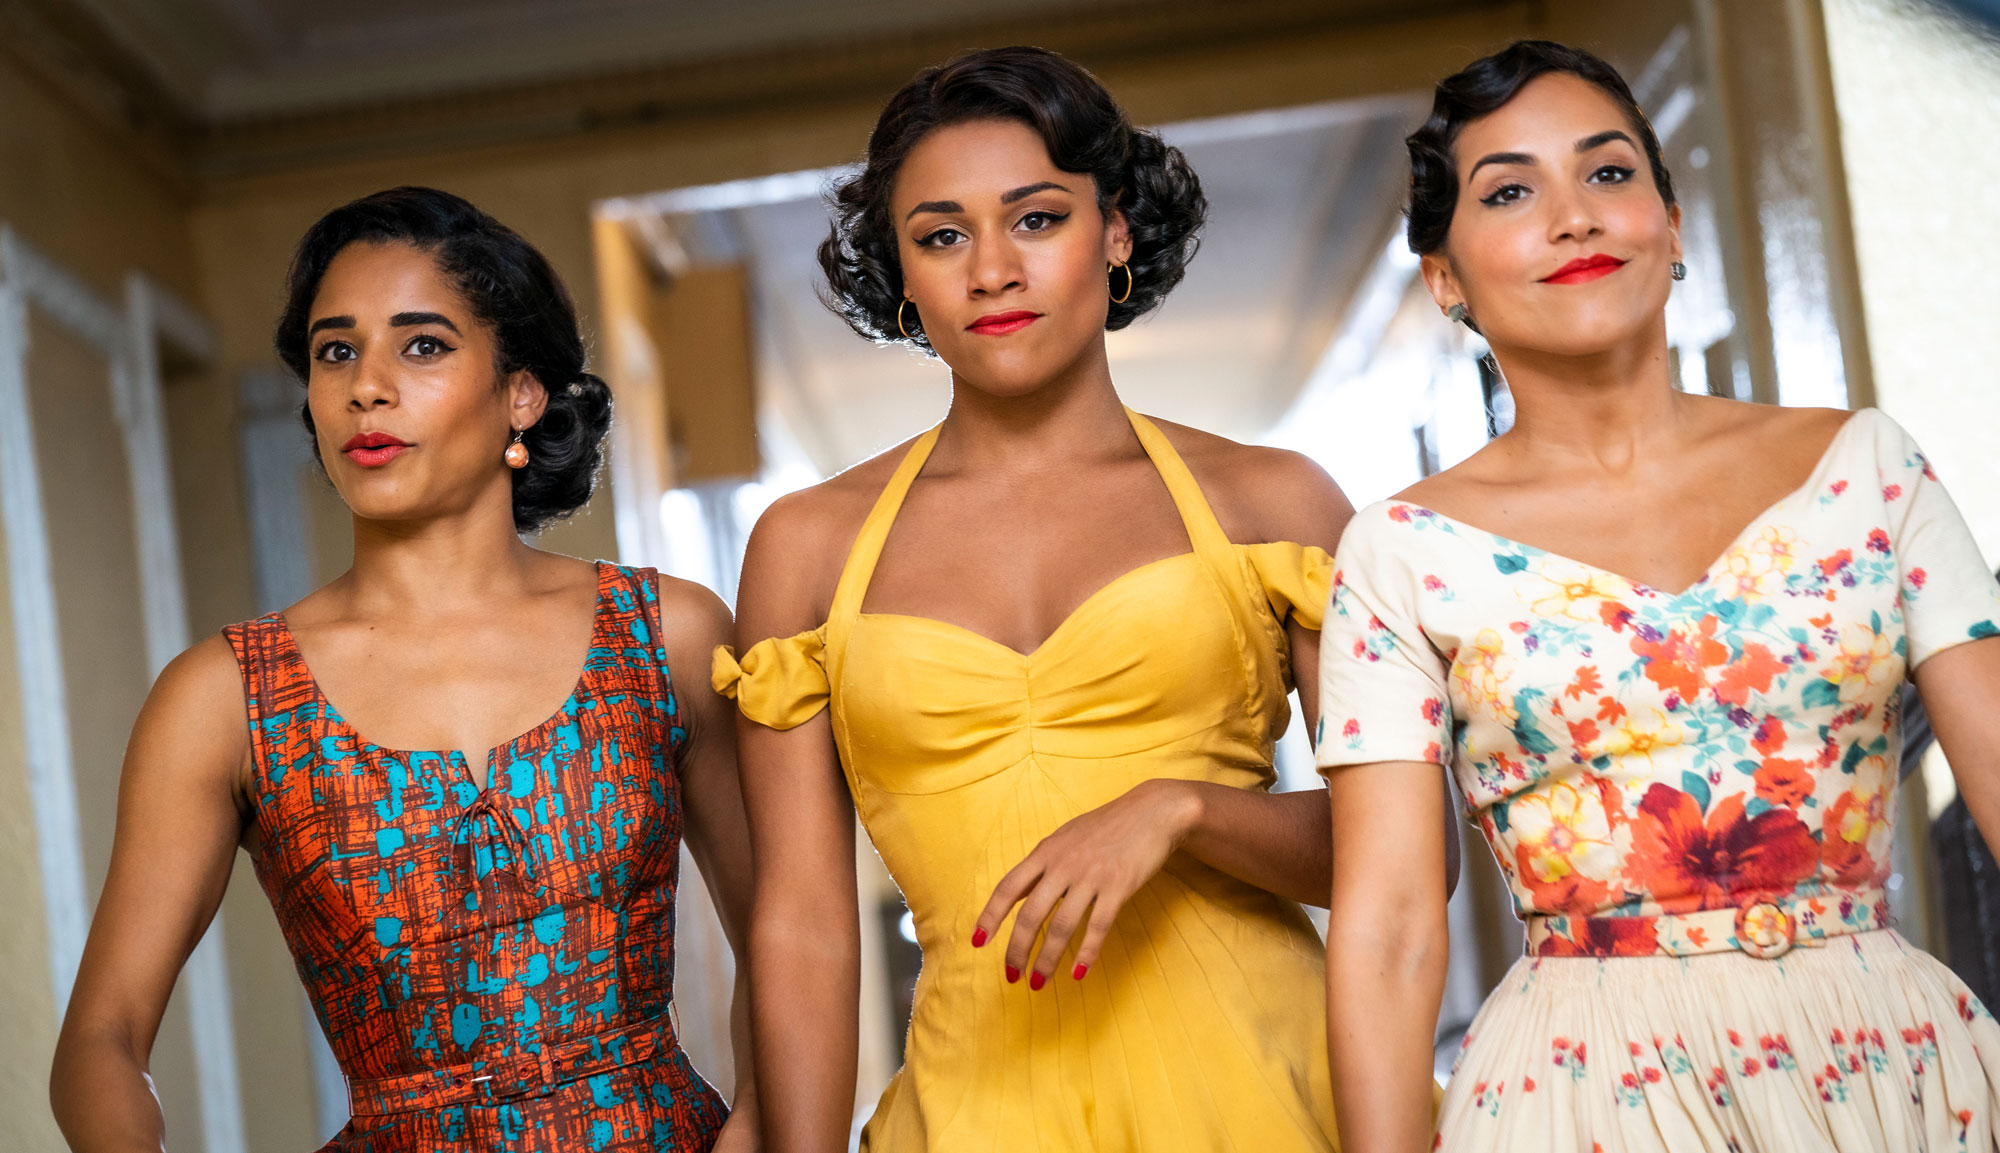 Ariana DeBose, Ana Isabelle and Ilda Mason in "West Side Story"